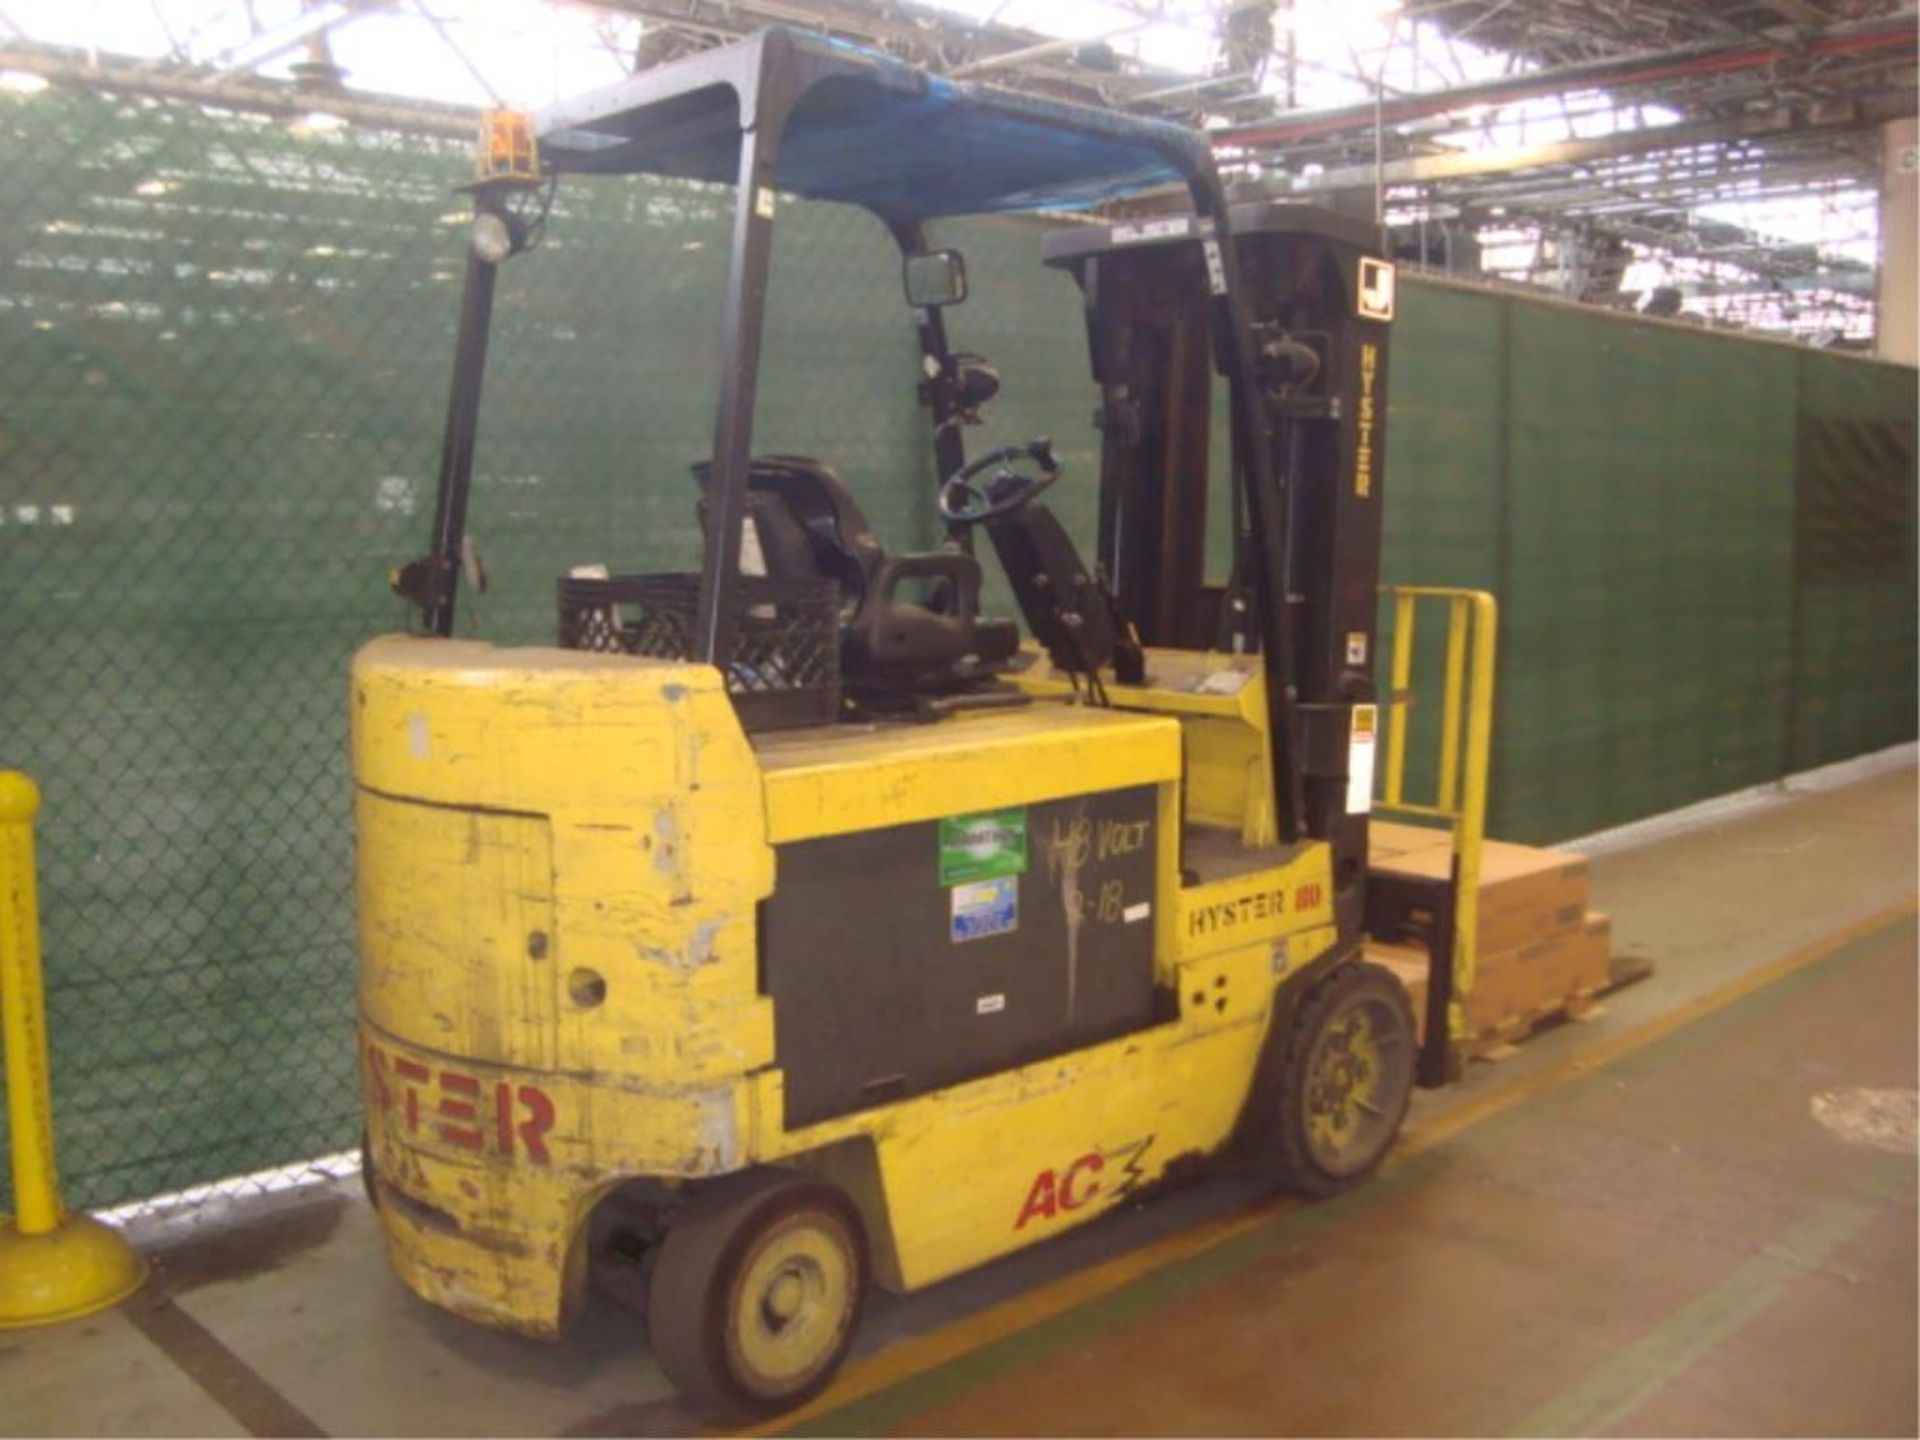 Hyster 7500 lb. Capacity Electric Forklift - Image 2 of 7